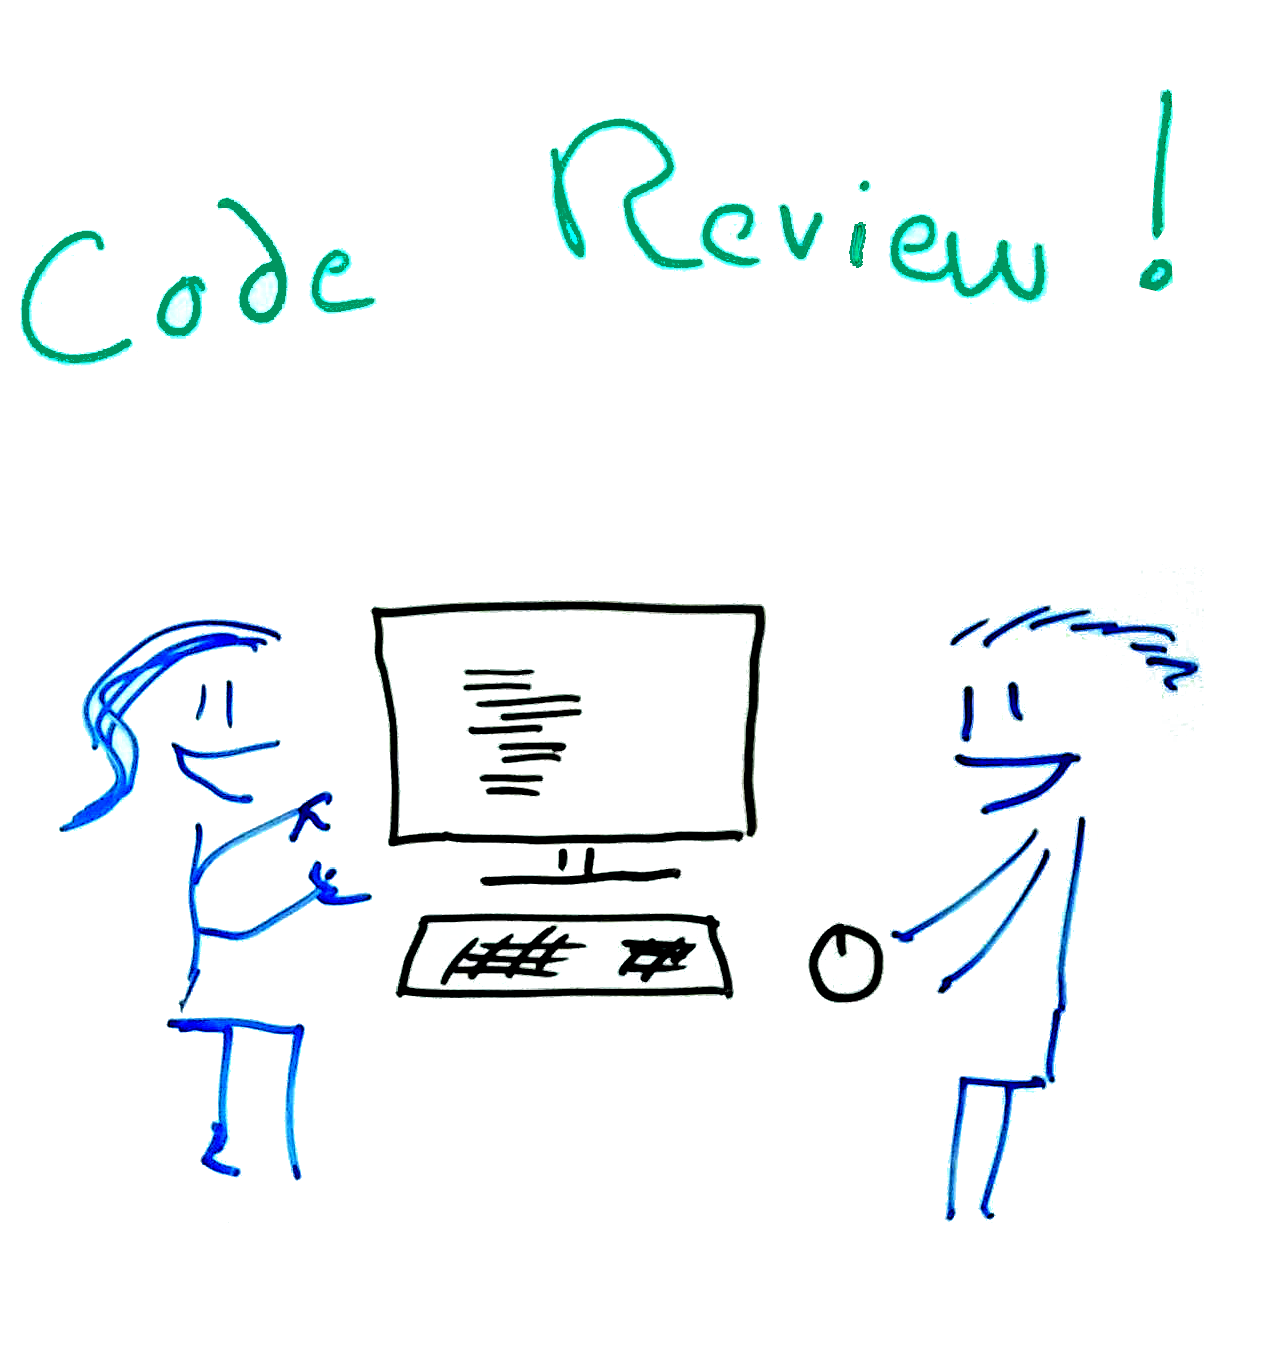 Code review